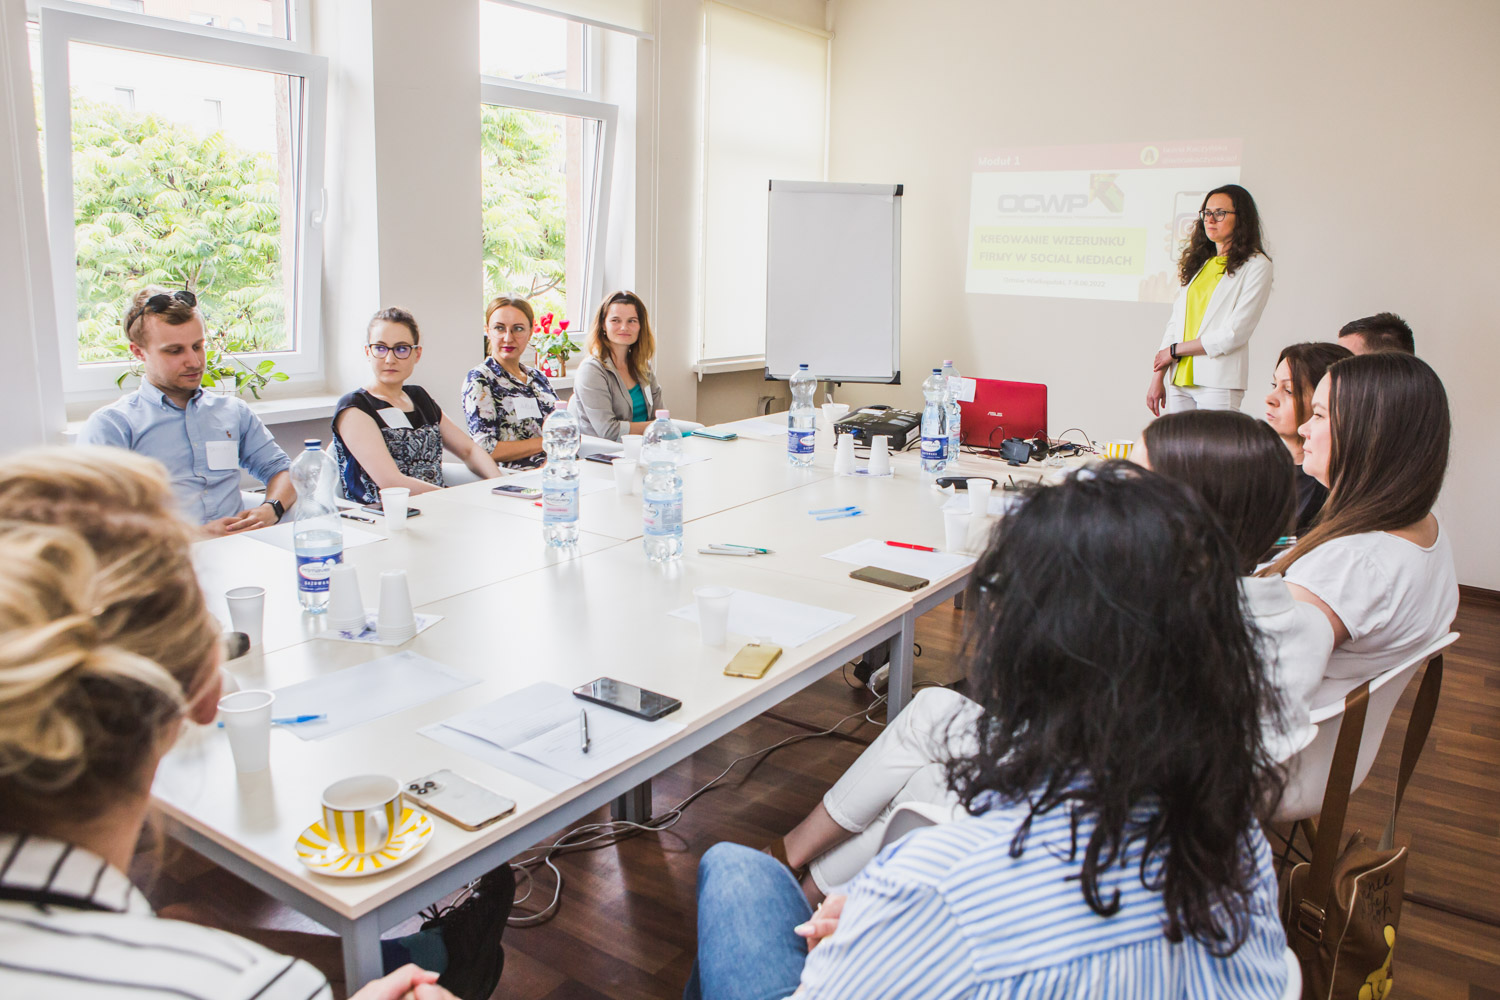 In the photo, the participants of the training "Business has big eyes... a series of reportages combined with an interview with the owners of Ostrów companies" carried out as part of the project entitled "E-Ostrów 2050 – Ecological, Energy and Economic City".